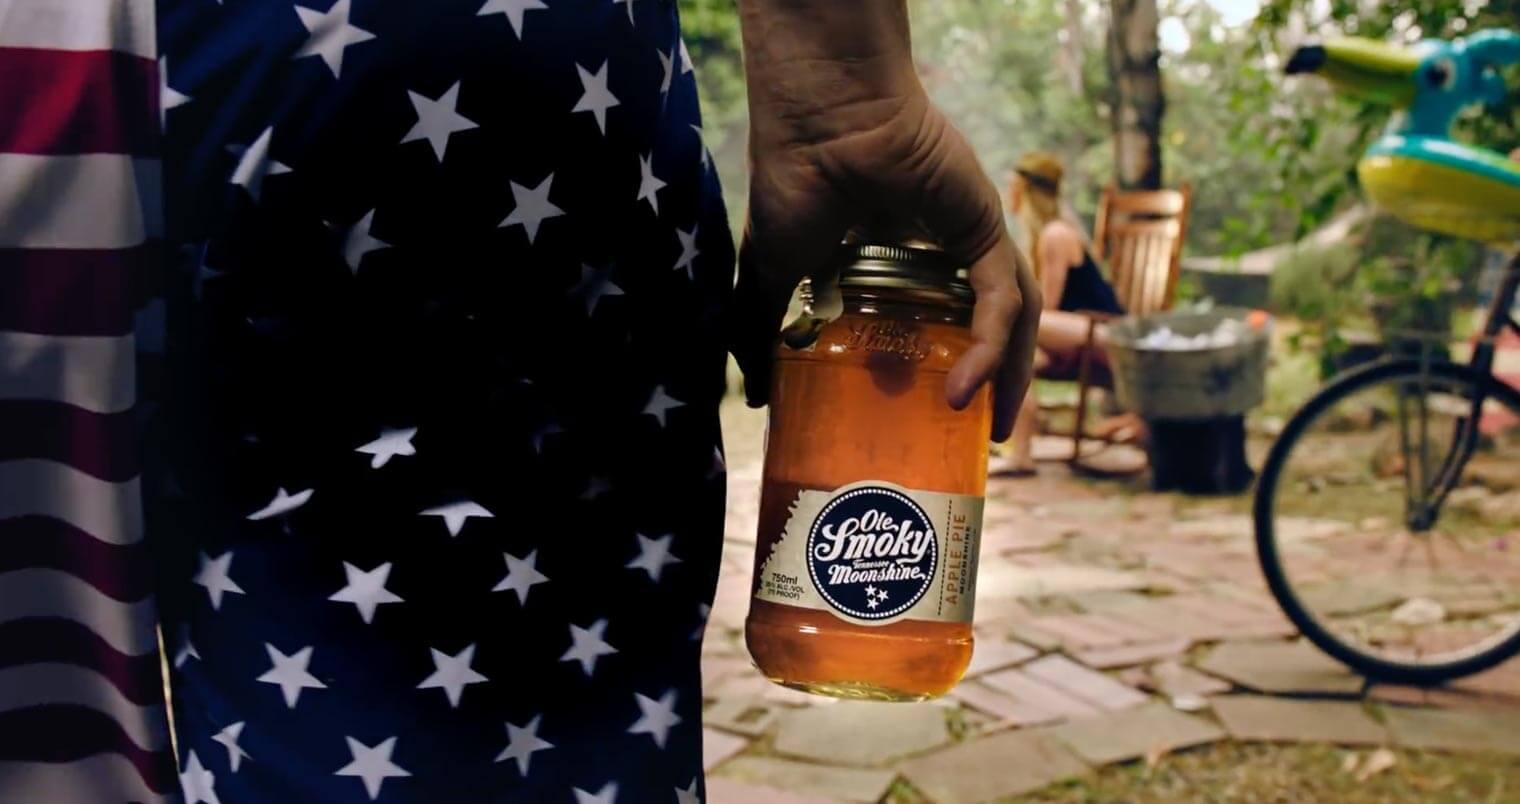 Ole Smoky Moonshine Launches Video Series, featured image